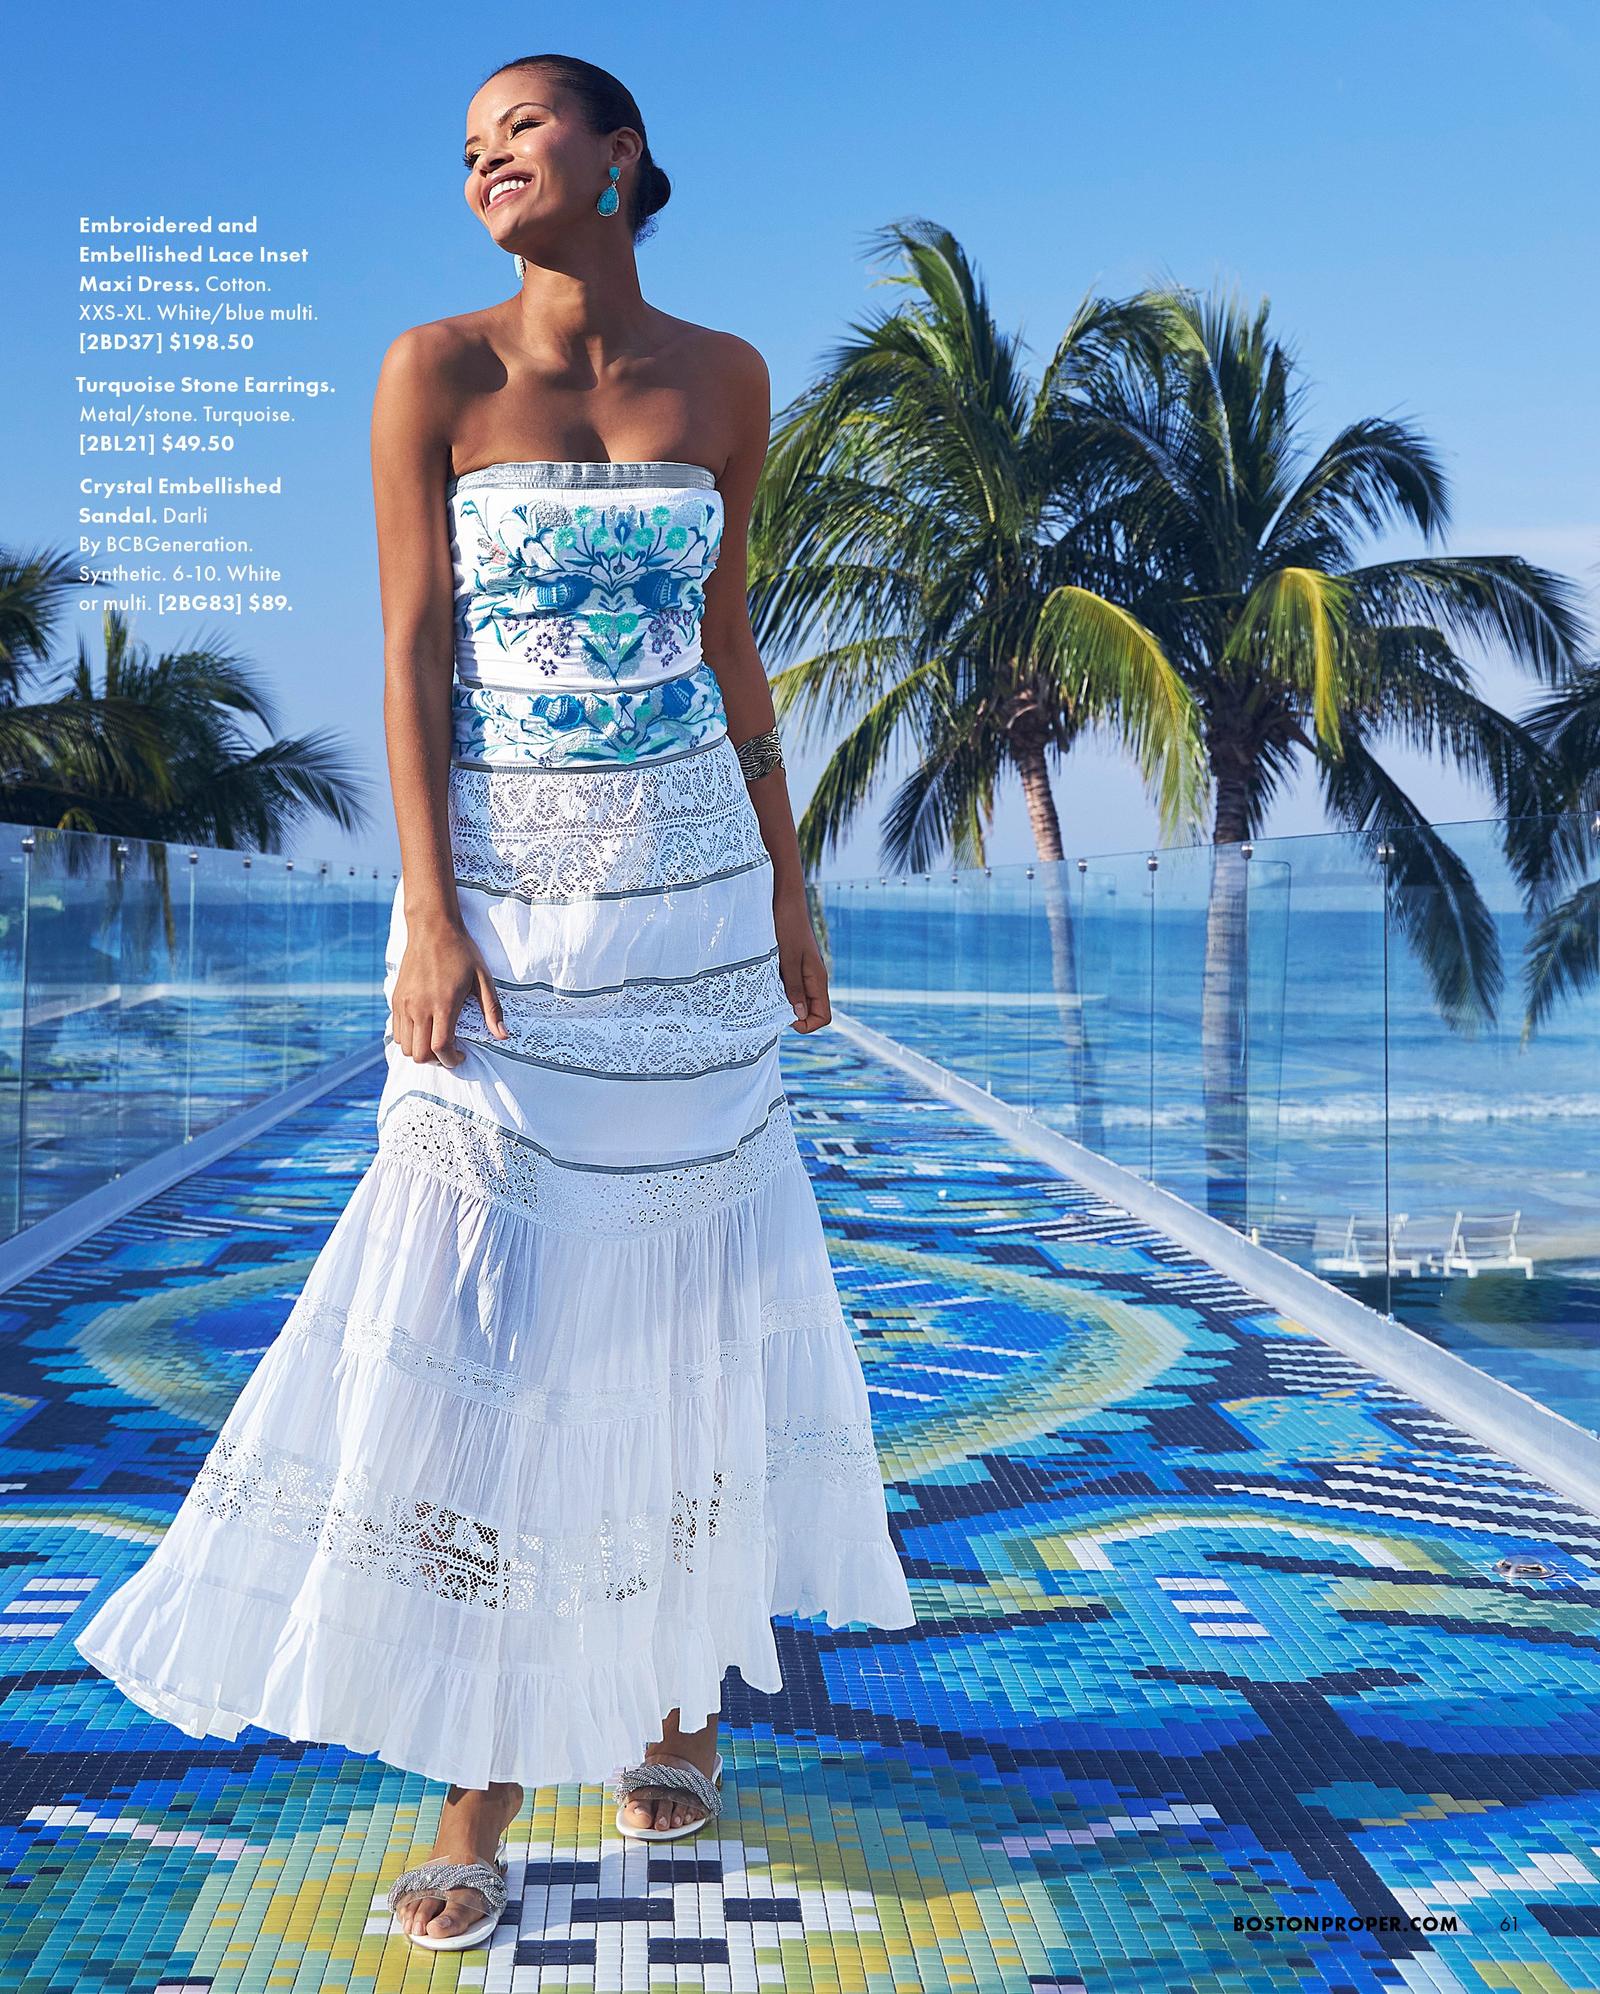 model wearing a blue and white embroidered and embellished strapless lace inset maxi dress, turquoise stone earrings, and crystal embellished sandals.